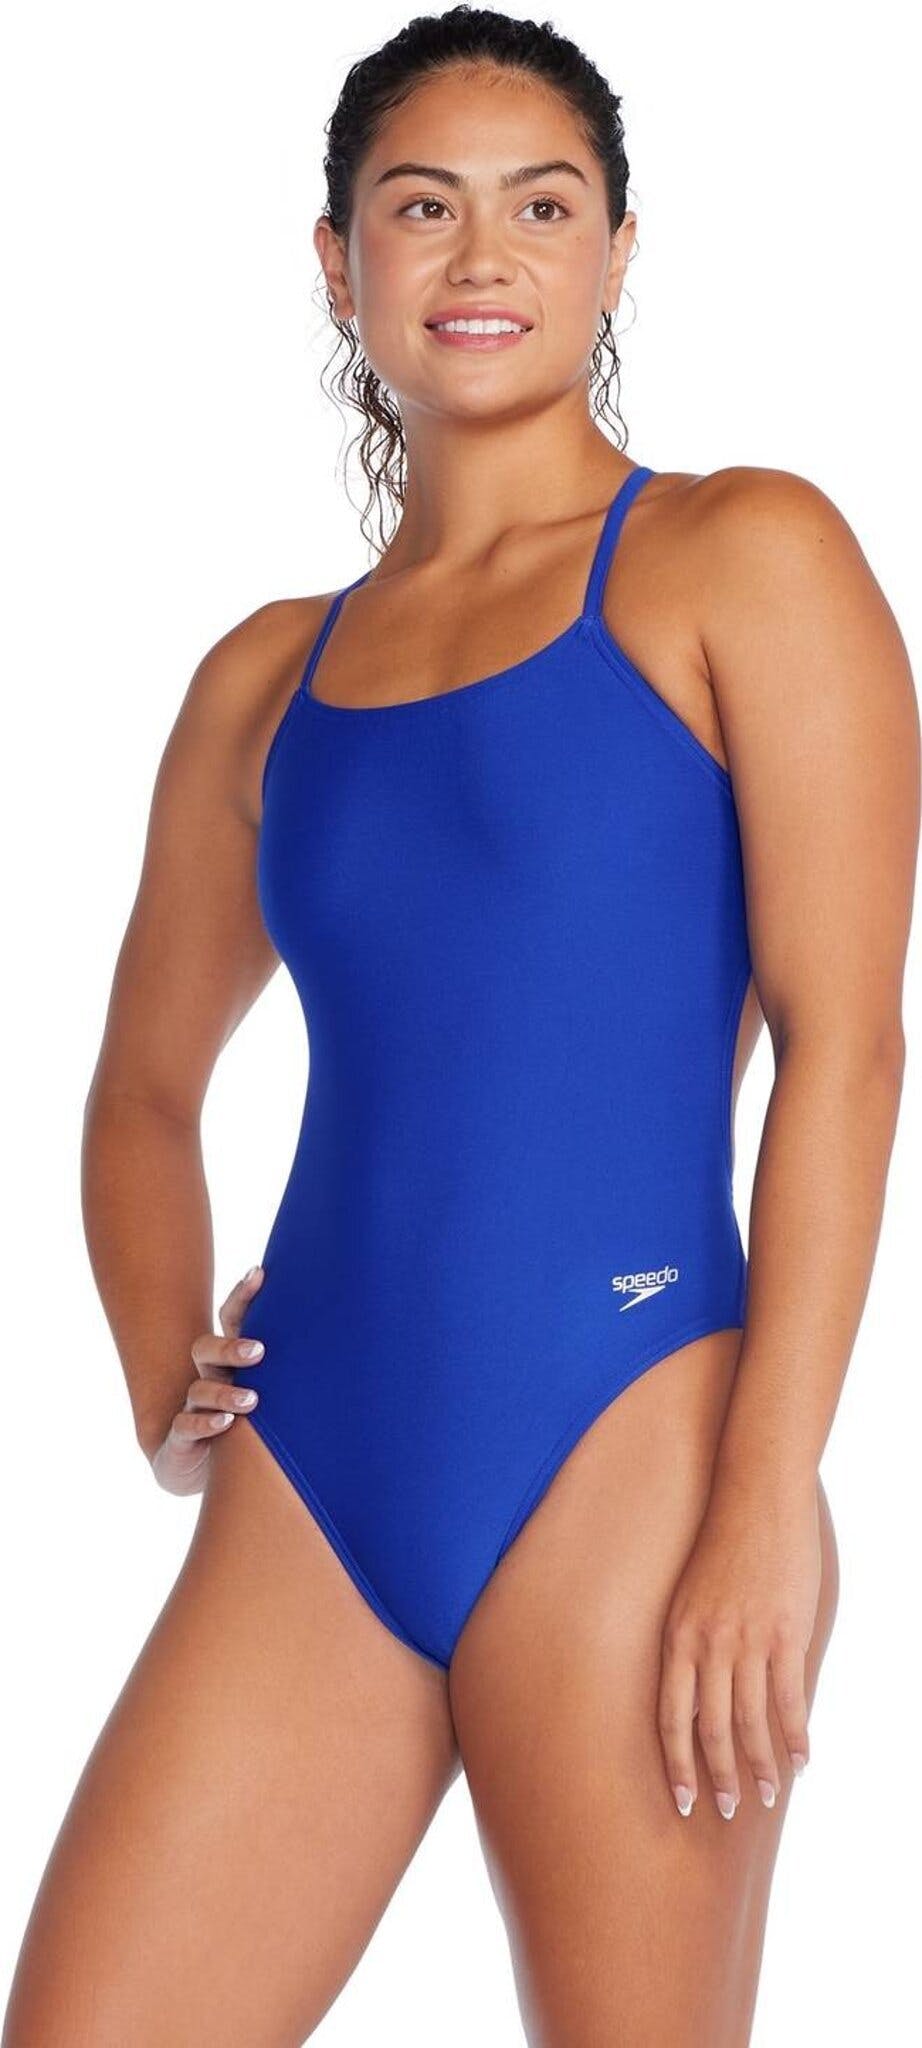 Product image for Solid Tie Back One Piece Swimsuit - Women's